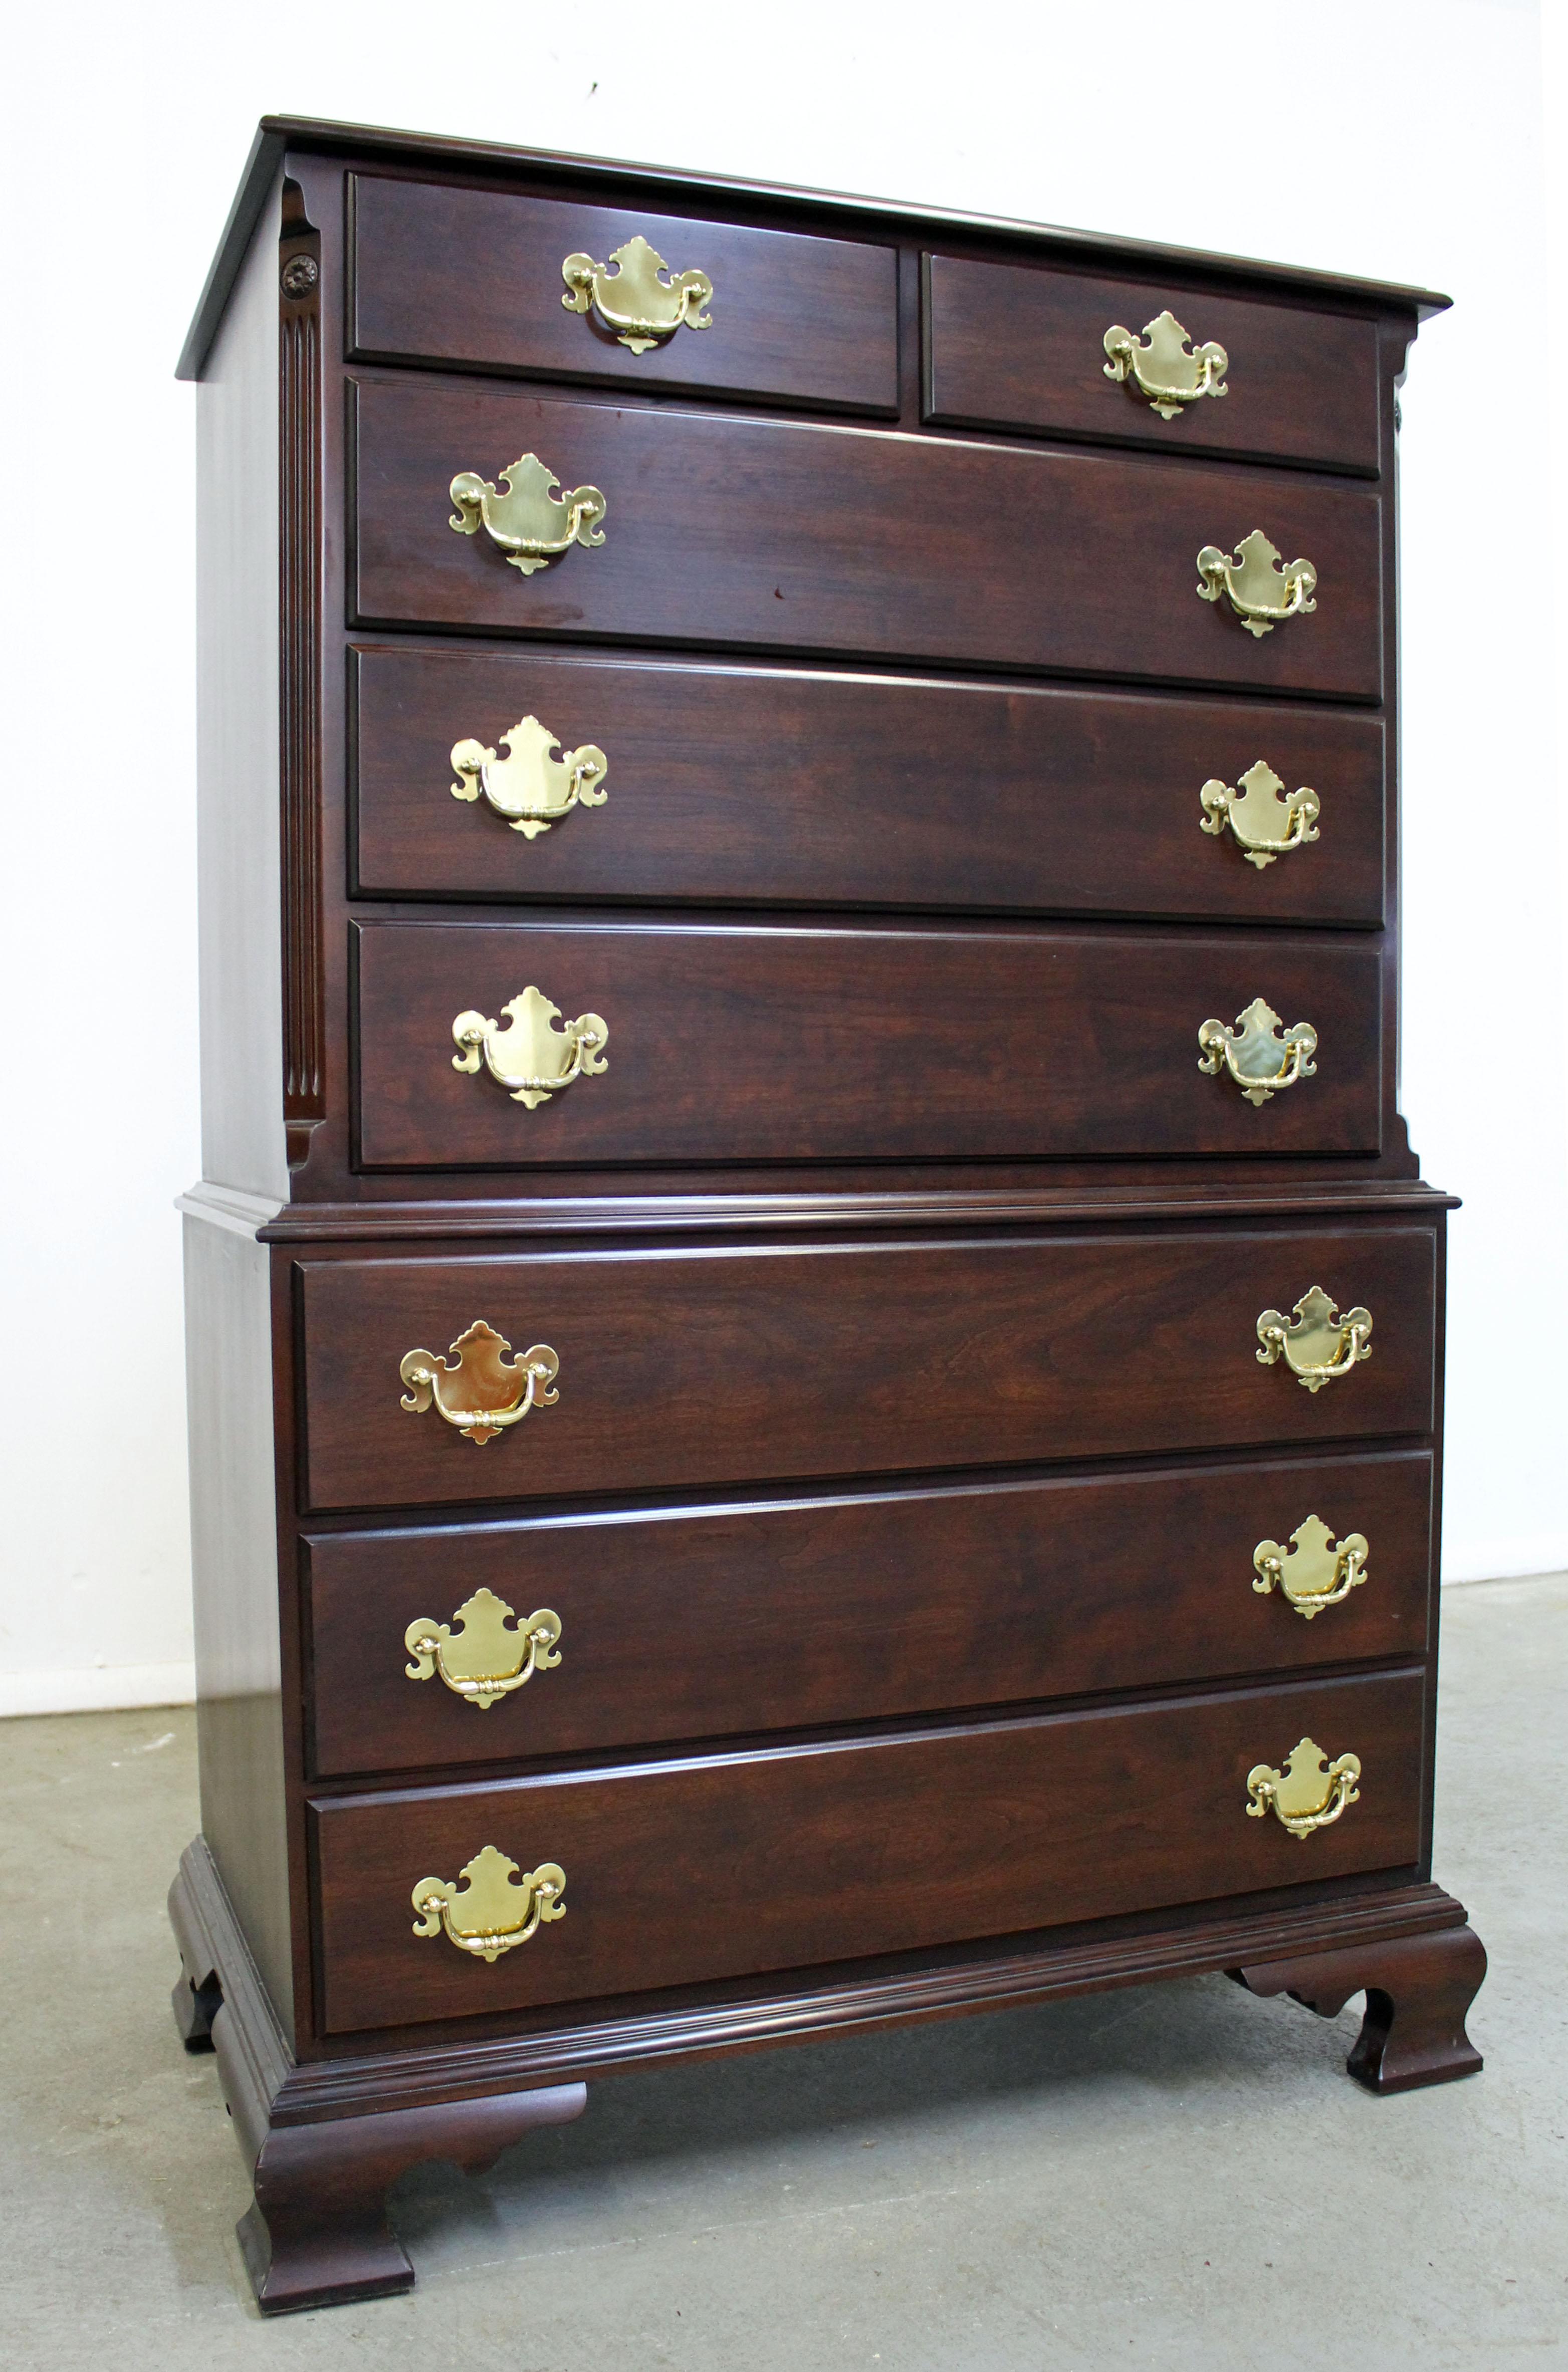 Offered is a Chippendale cherry dresser by Statton Old Town. Features 8 dovetailed drawers with gold tone pulls. It is in good condition, shows some signs of wear (age wear, surface scratches- see photos), but nothing overly noticeable. It is signed